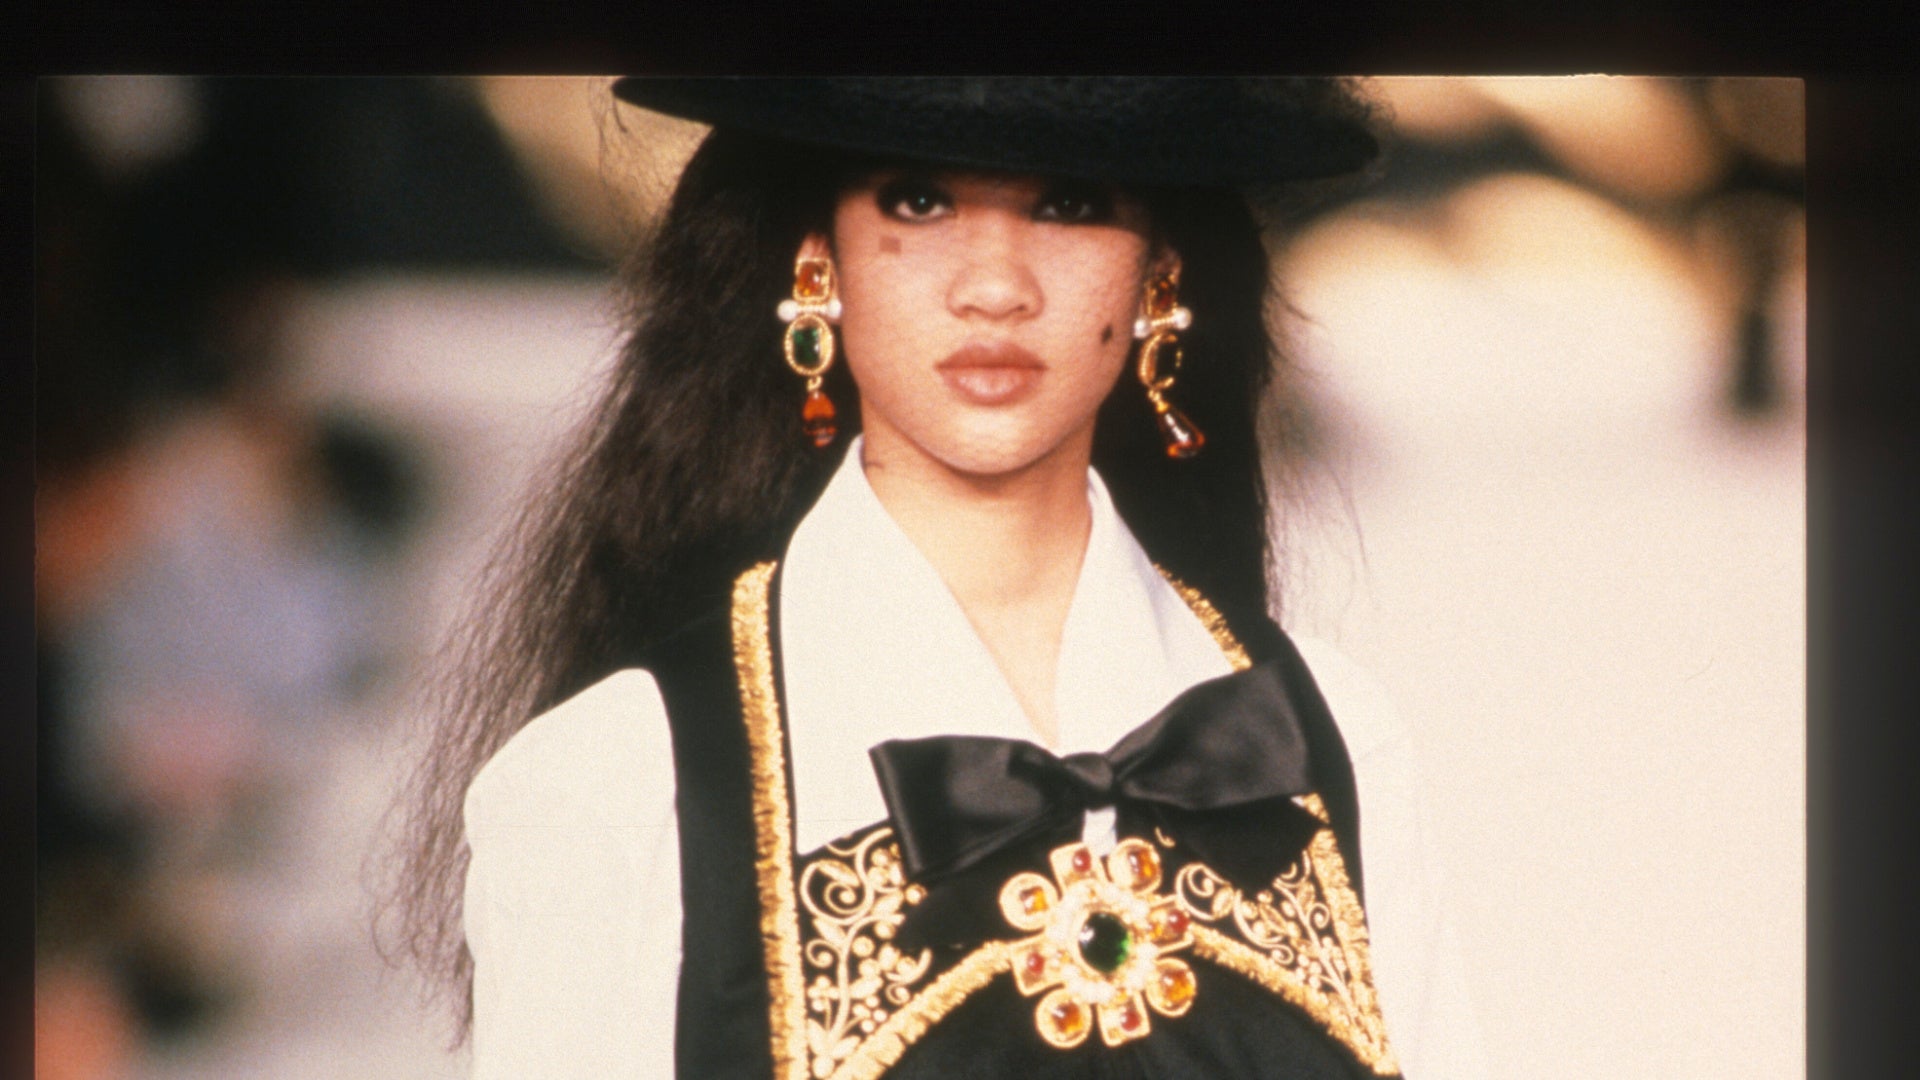 Kimora Lee Simmons Is An OG Chanel Muse, And Let’s Not Forget It